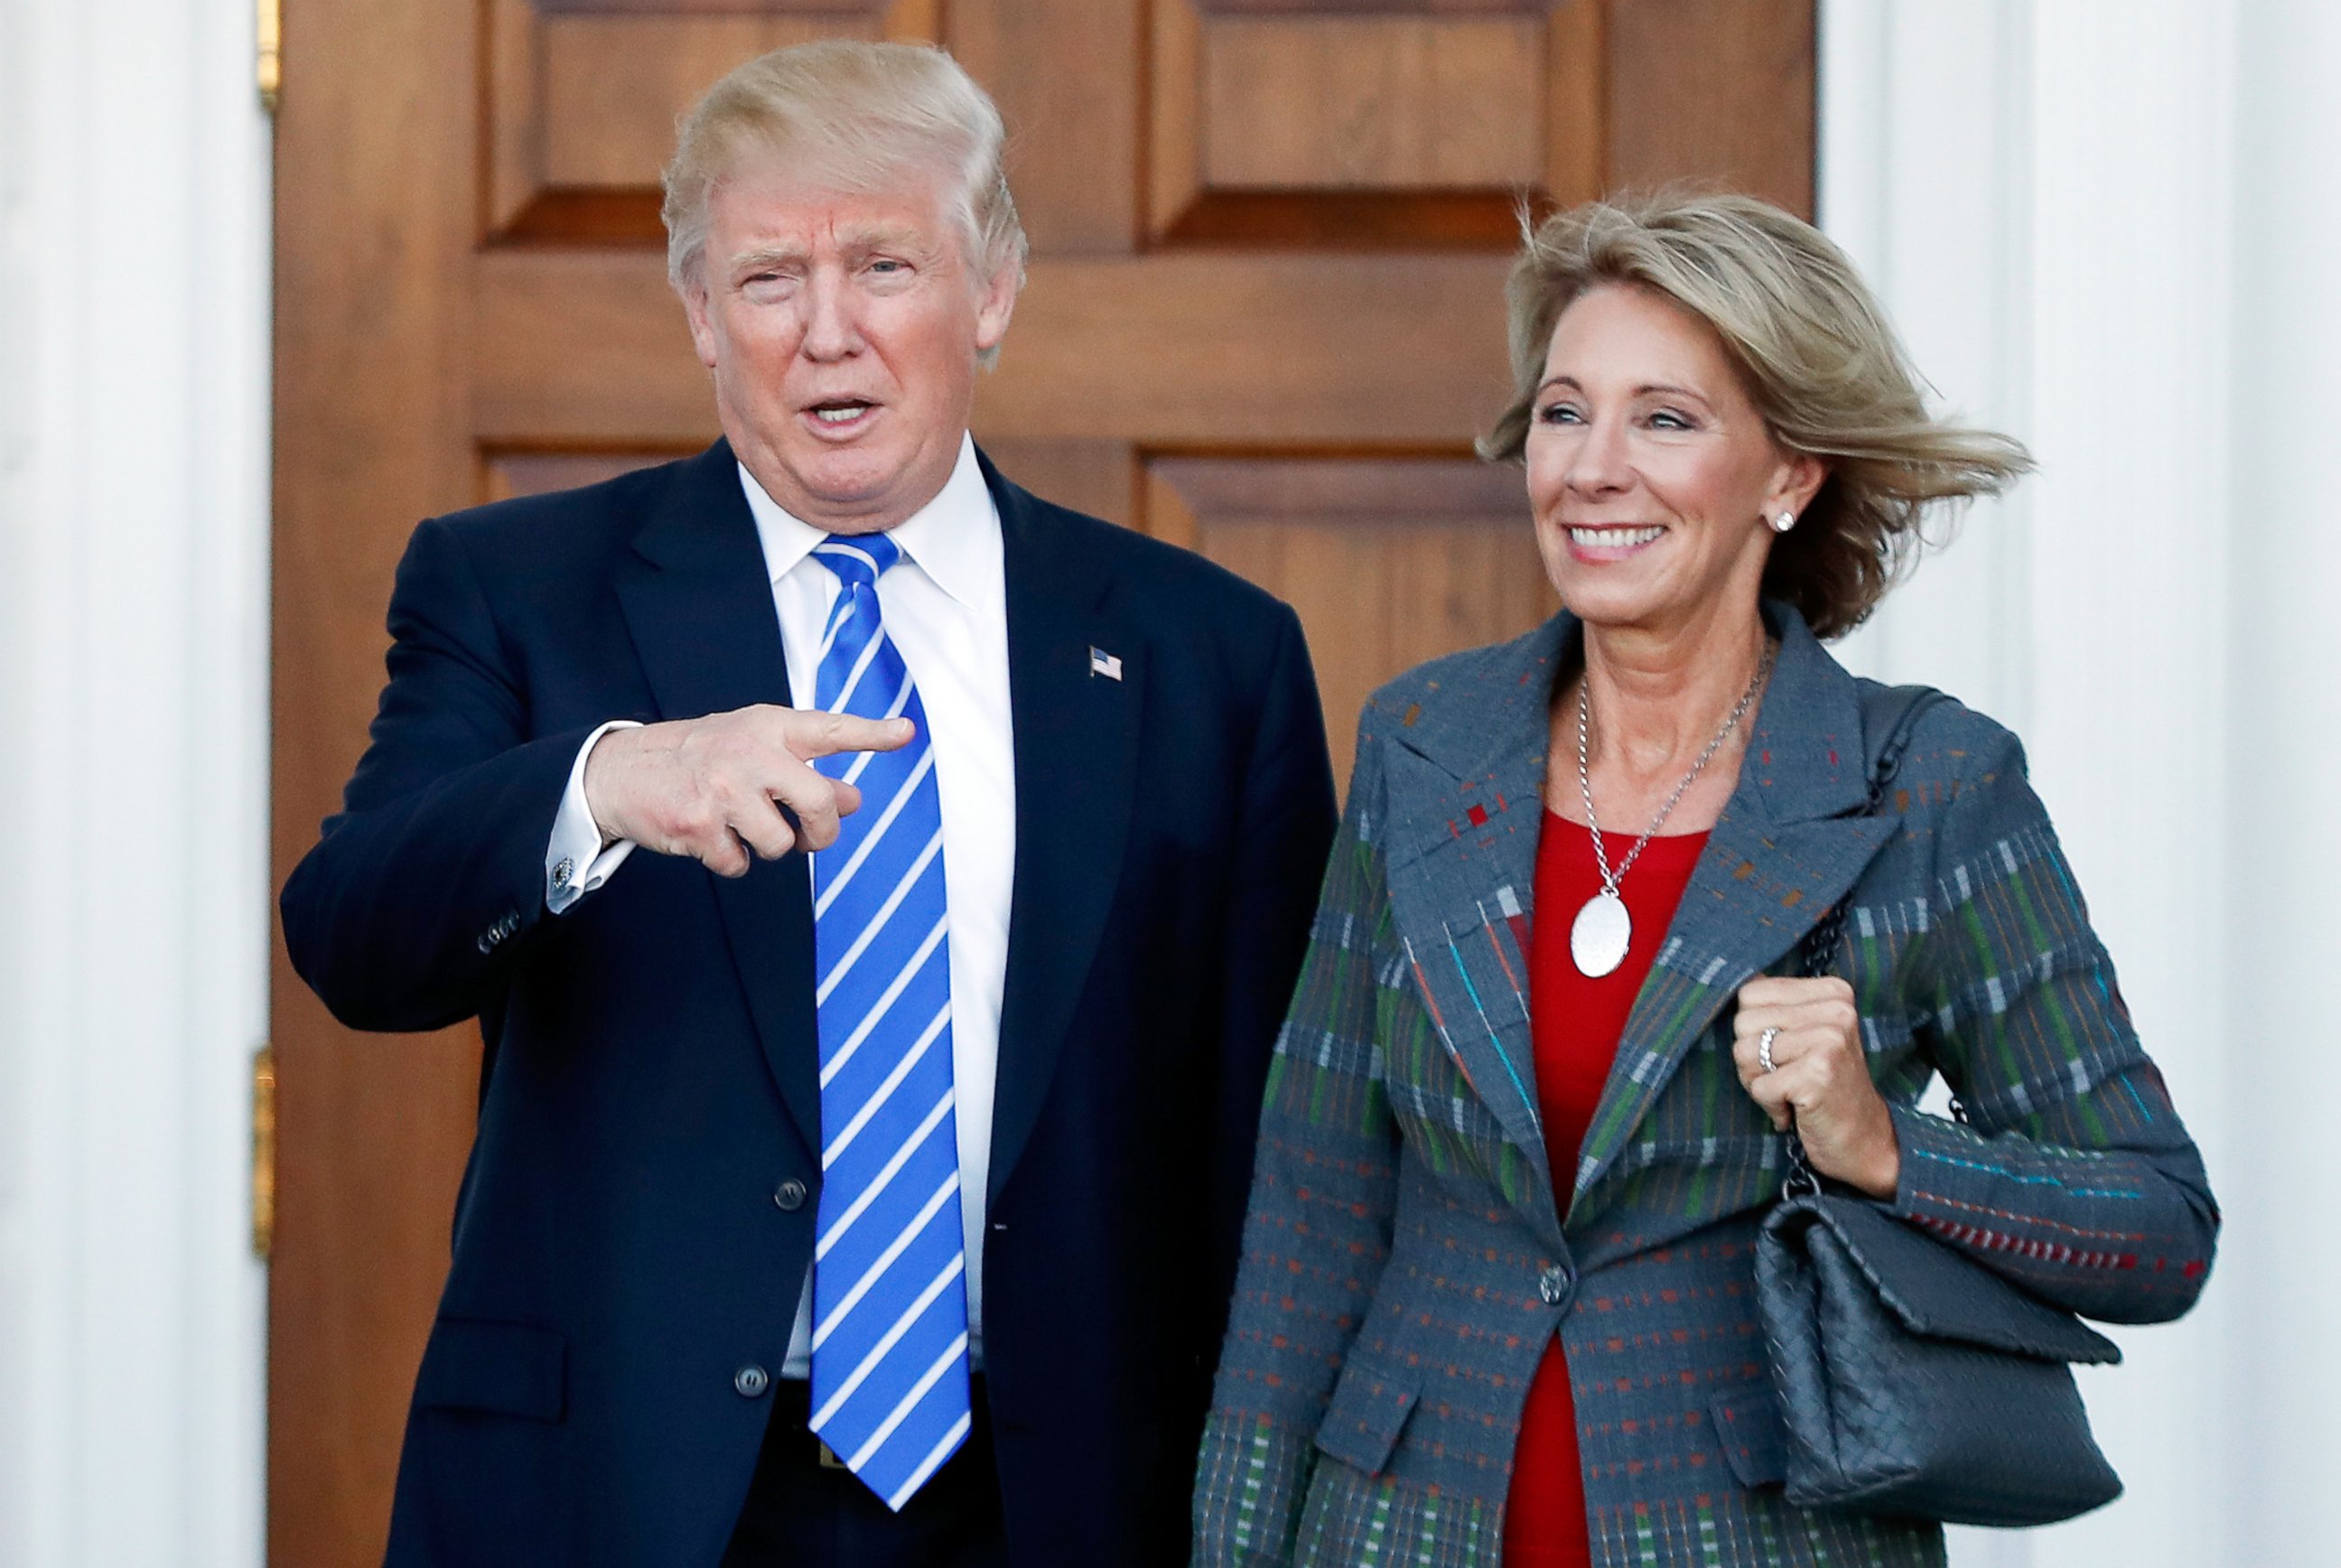 PHOTO: In this Nov. 19, 2016 file photo, President-elect Donald Trump stands with Education Secretary-designate Betsy DeVos in Bedminster, N.J., Nov. 19, 2016.